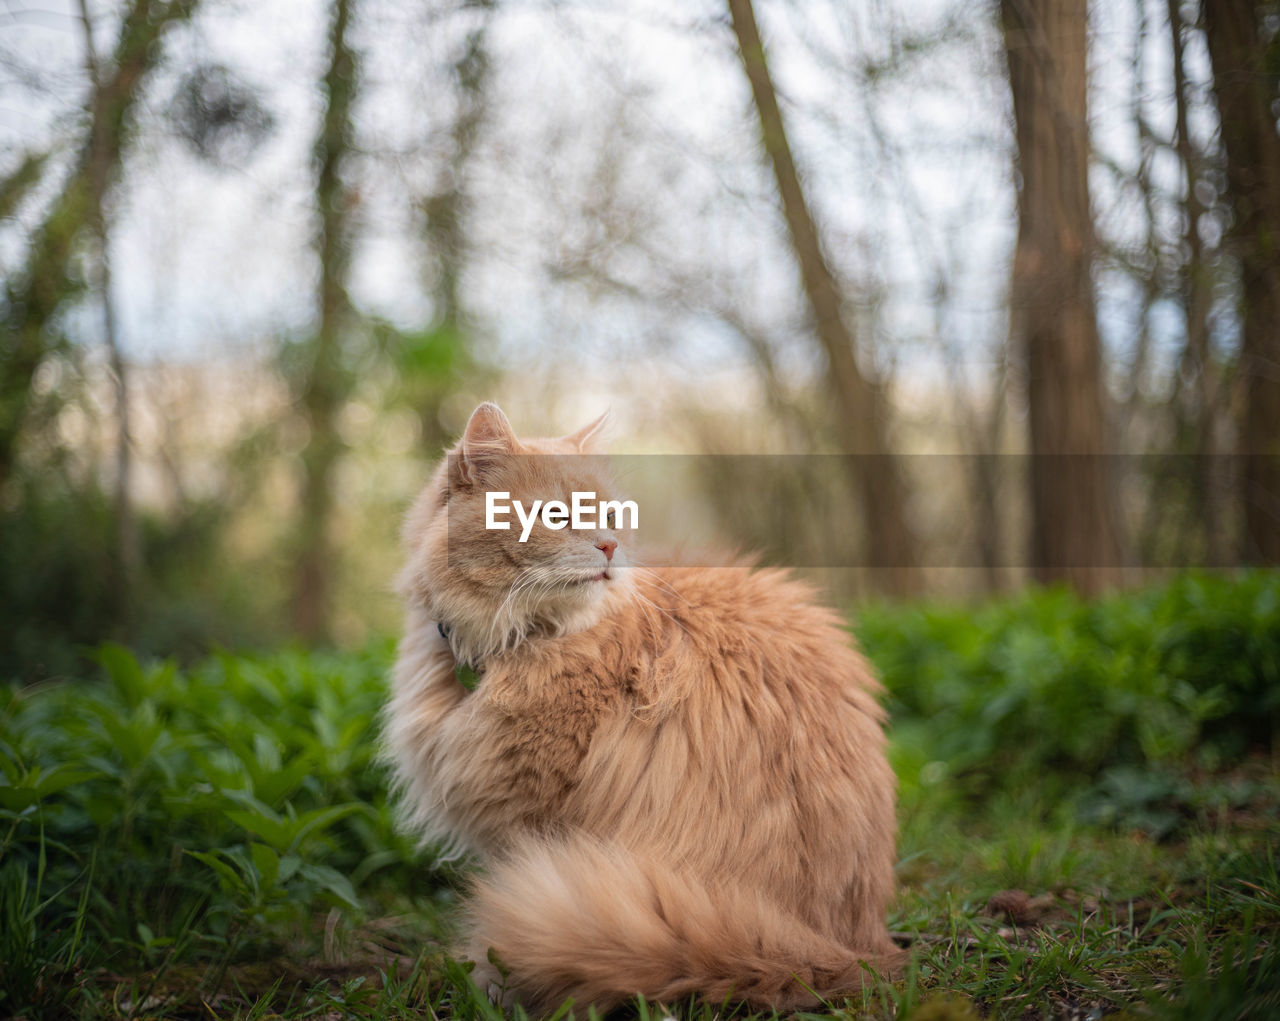 animal themes, animal, mammal, cat, one animal, pet, grass, wildlife, plant, domestic animals, nature, tree, felidae, no people, animal wildlife, small to medium-sized cats, feline, land, sitting, outdoors, animal hair, whiskers, carnivore, day, portrait, forest, focus on foreground